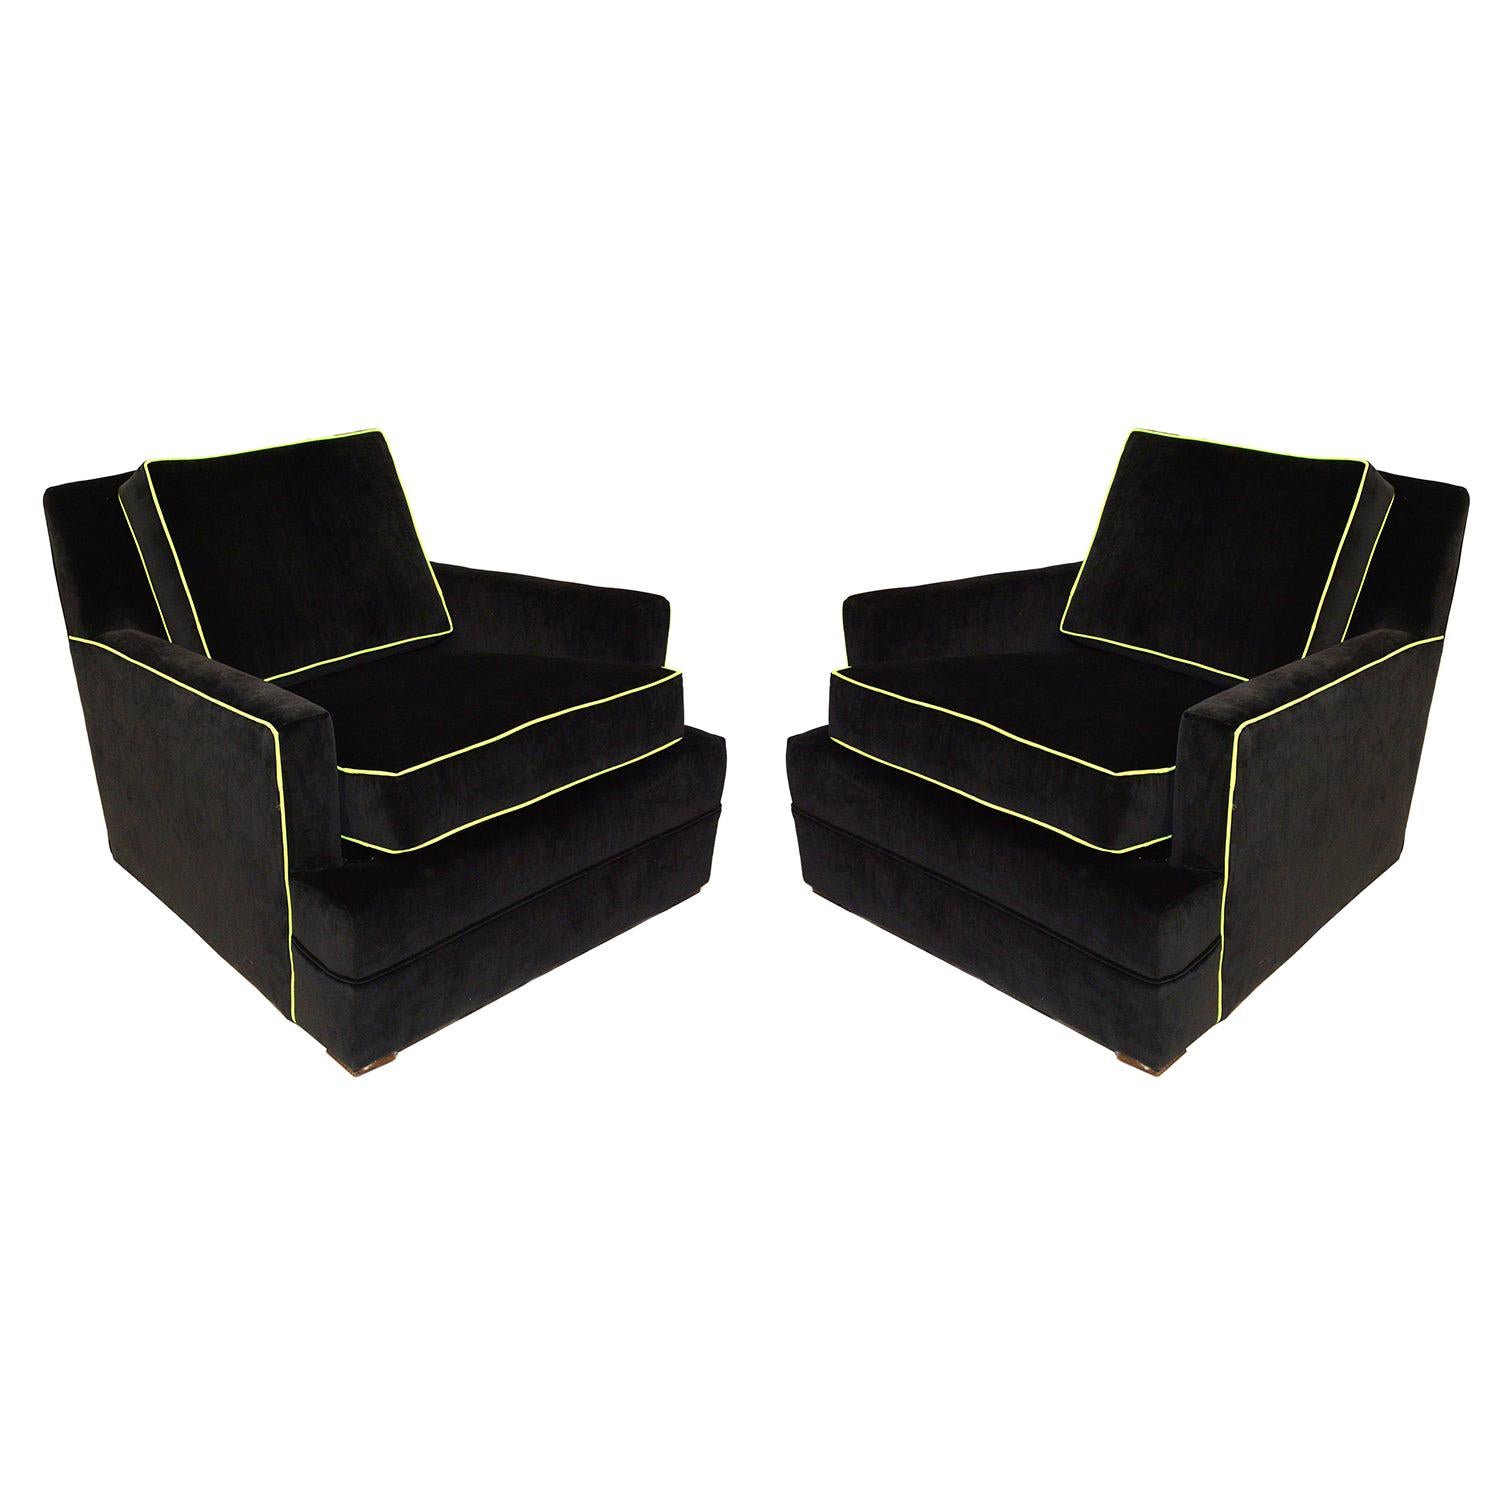 1950s Vanleigh Black Velvet Club Chairs w/Safety Yellow Green Piping